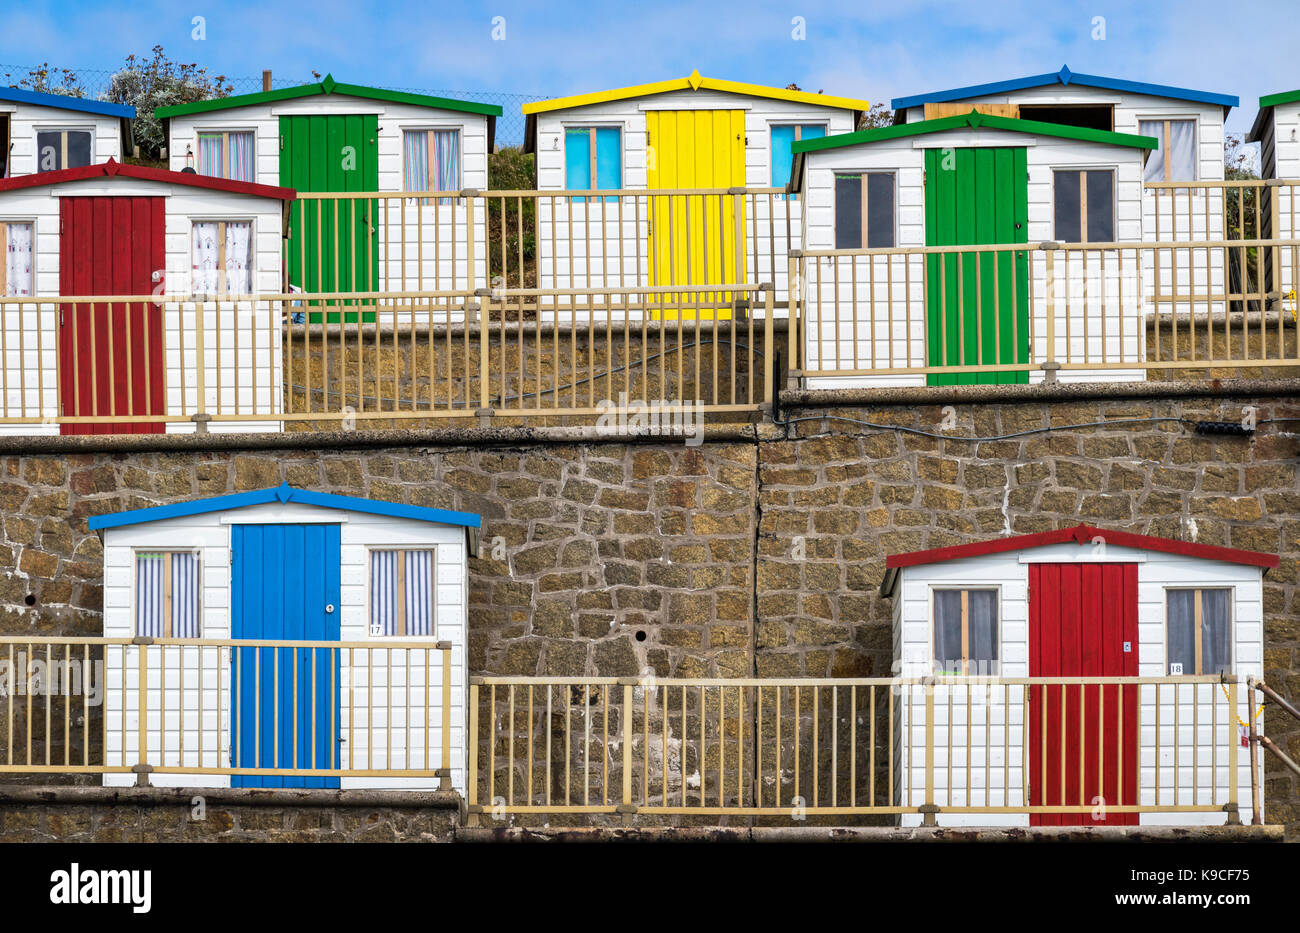 Group of Colourful Beach Huts Overlooking Saturday’s Pit and Summerleaze Beach, Bude, Cornwall. Stock Photo